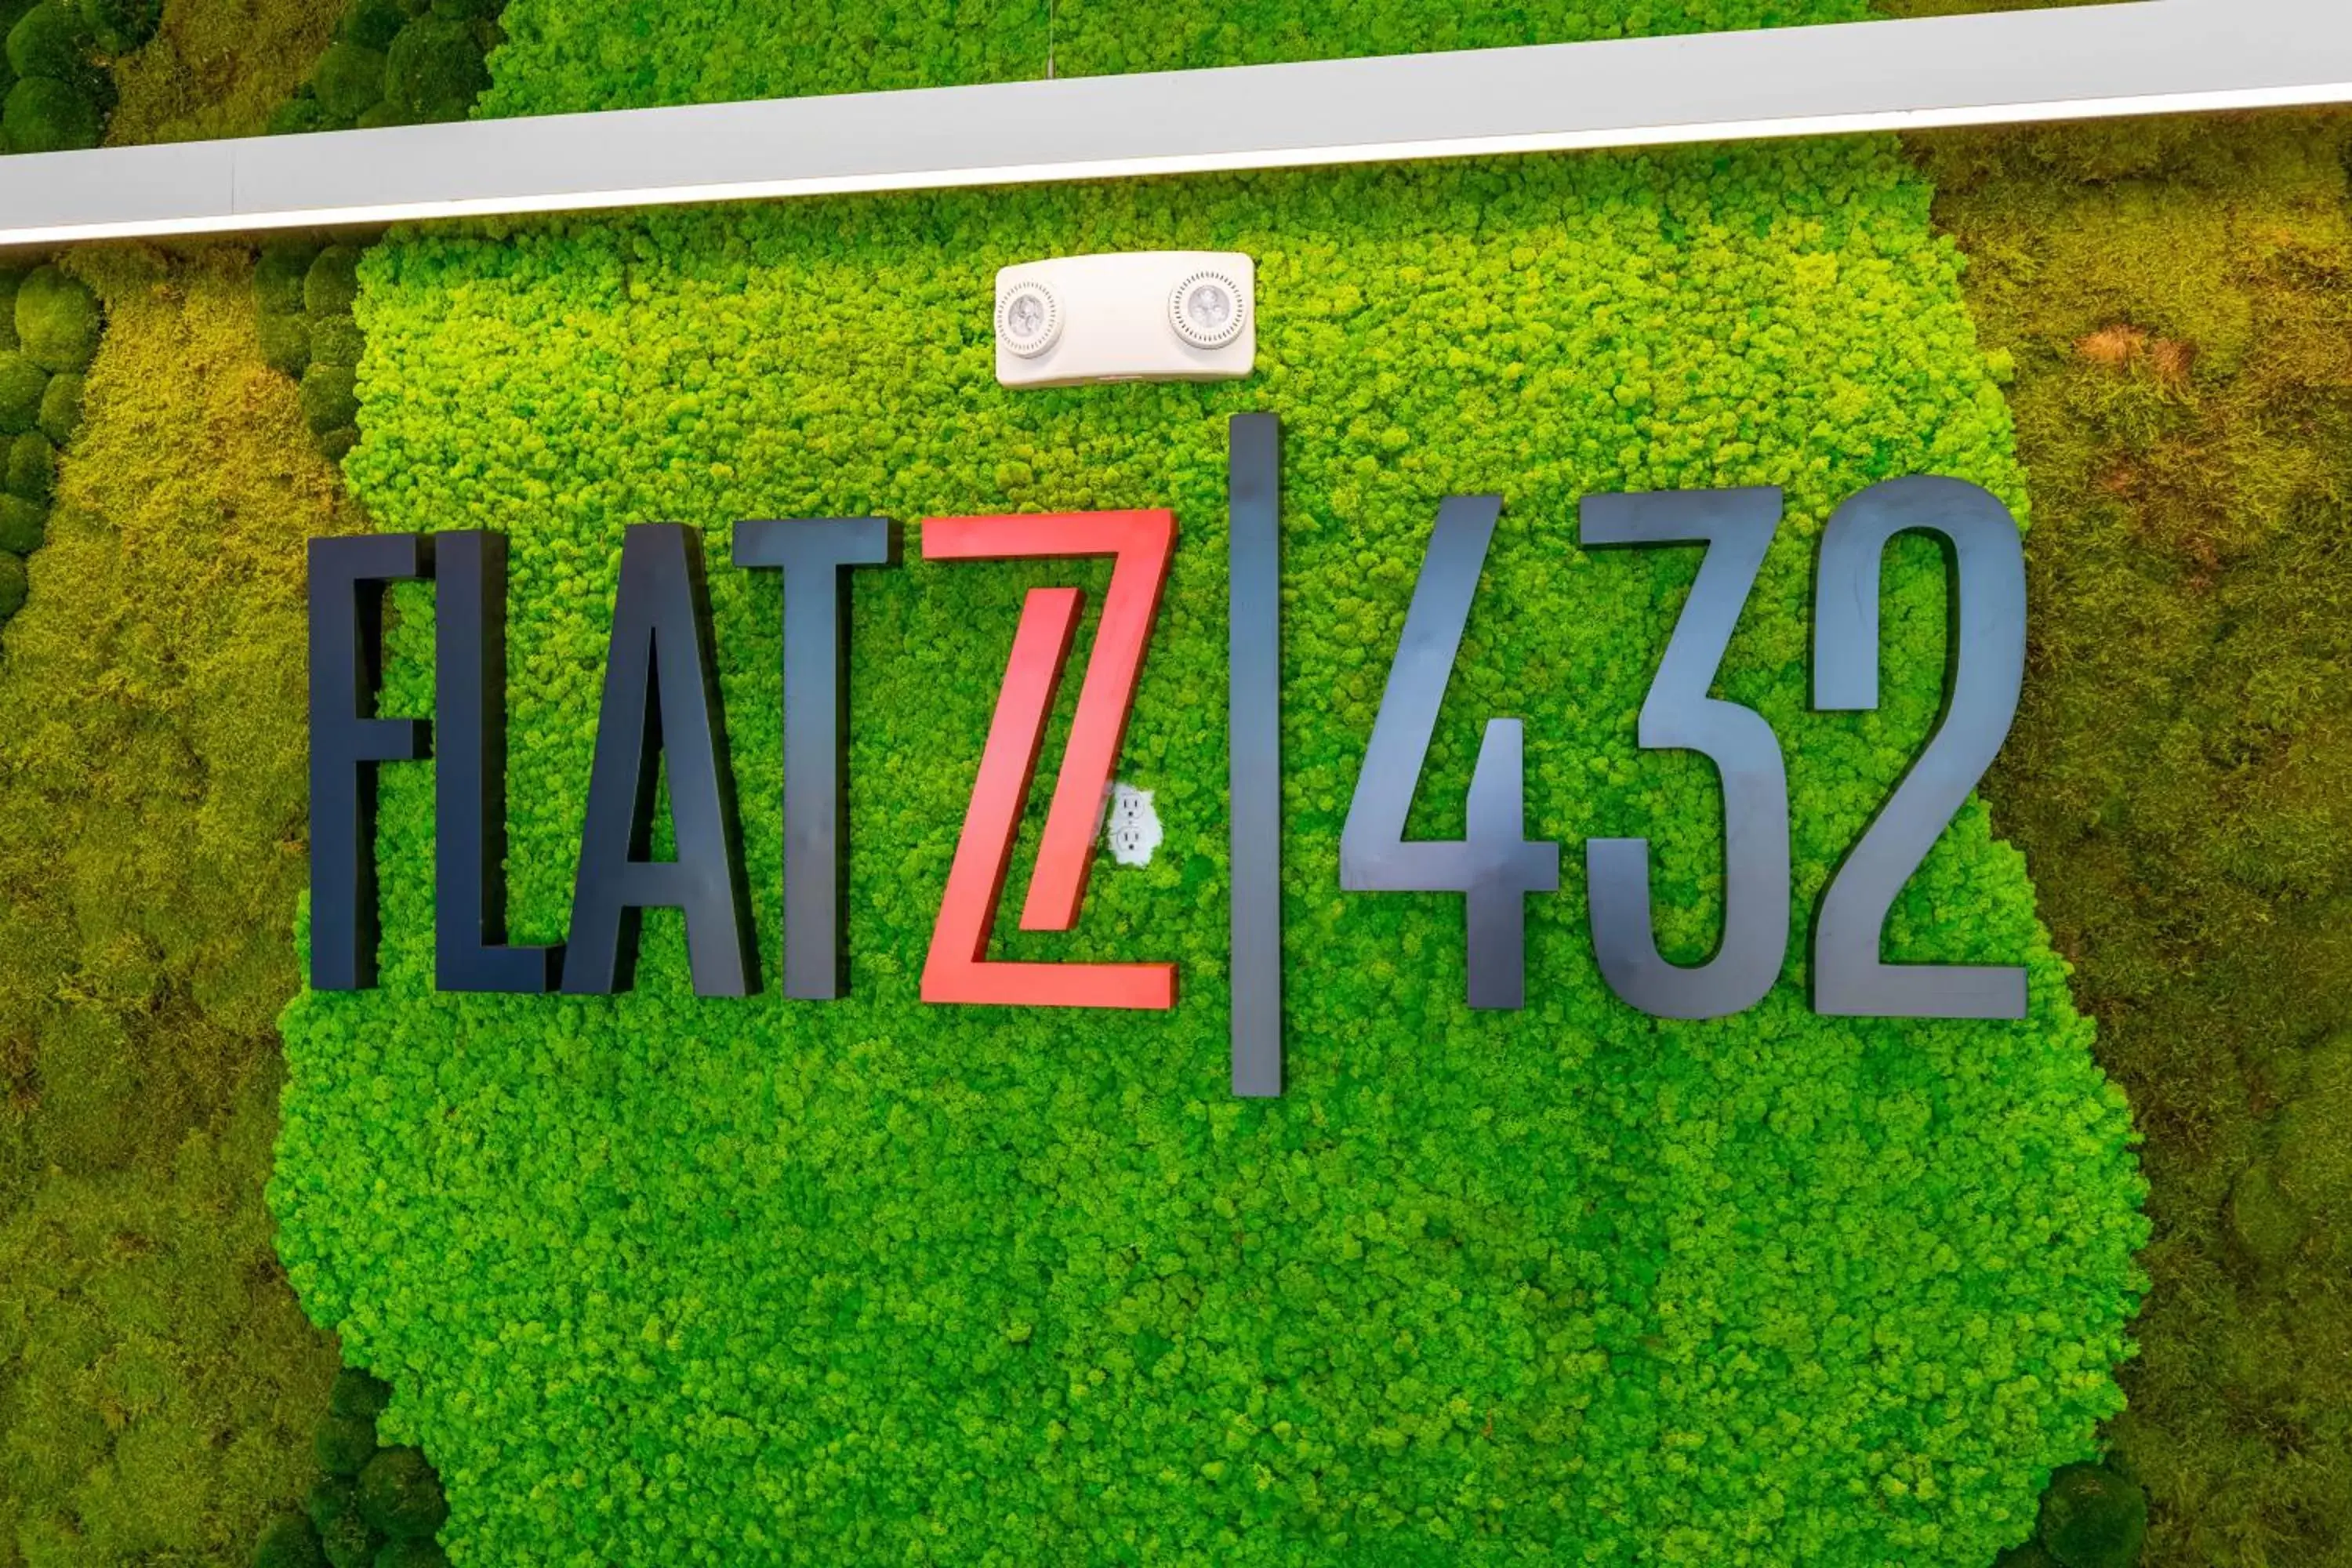 Property logo or sign, Property Logo/Sign in Flatz432 Apartments by Barsala